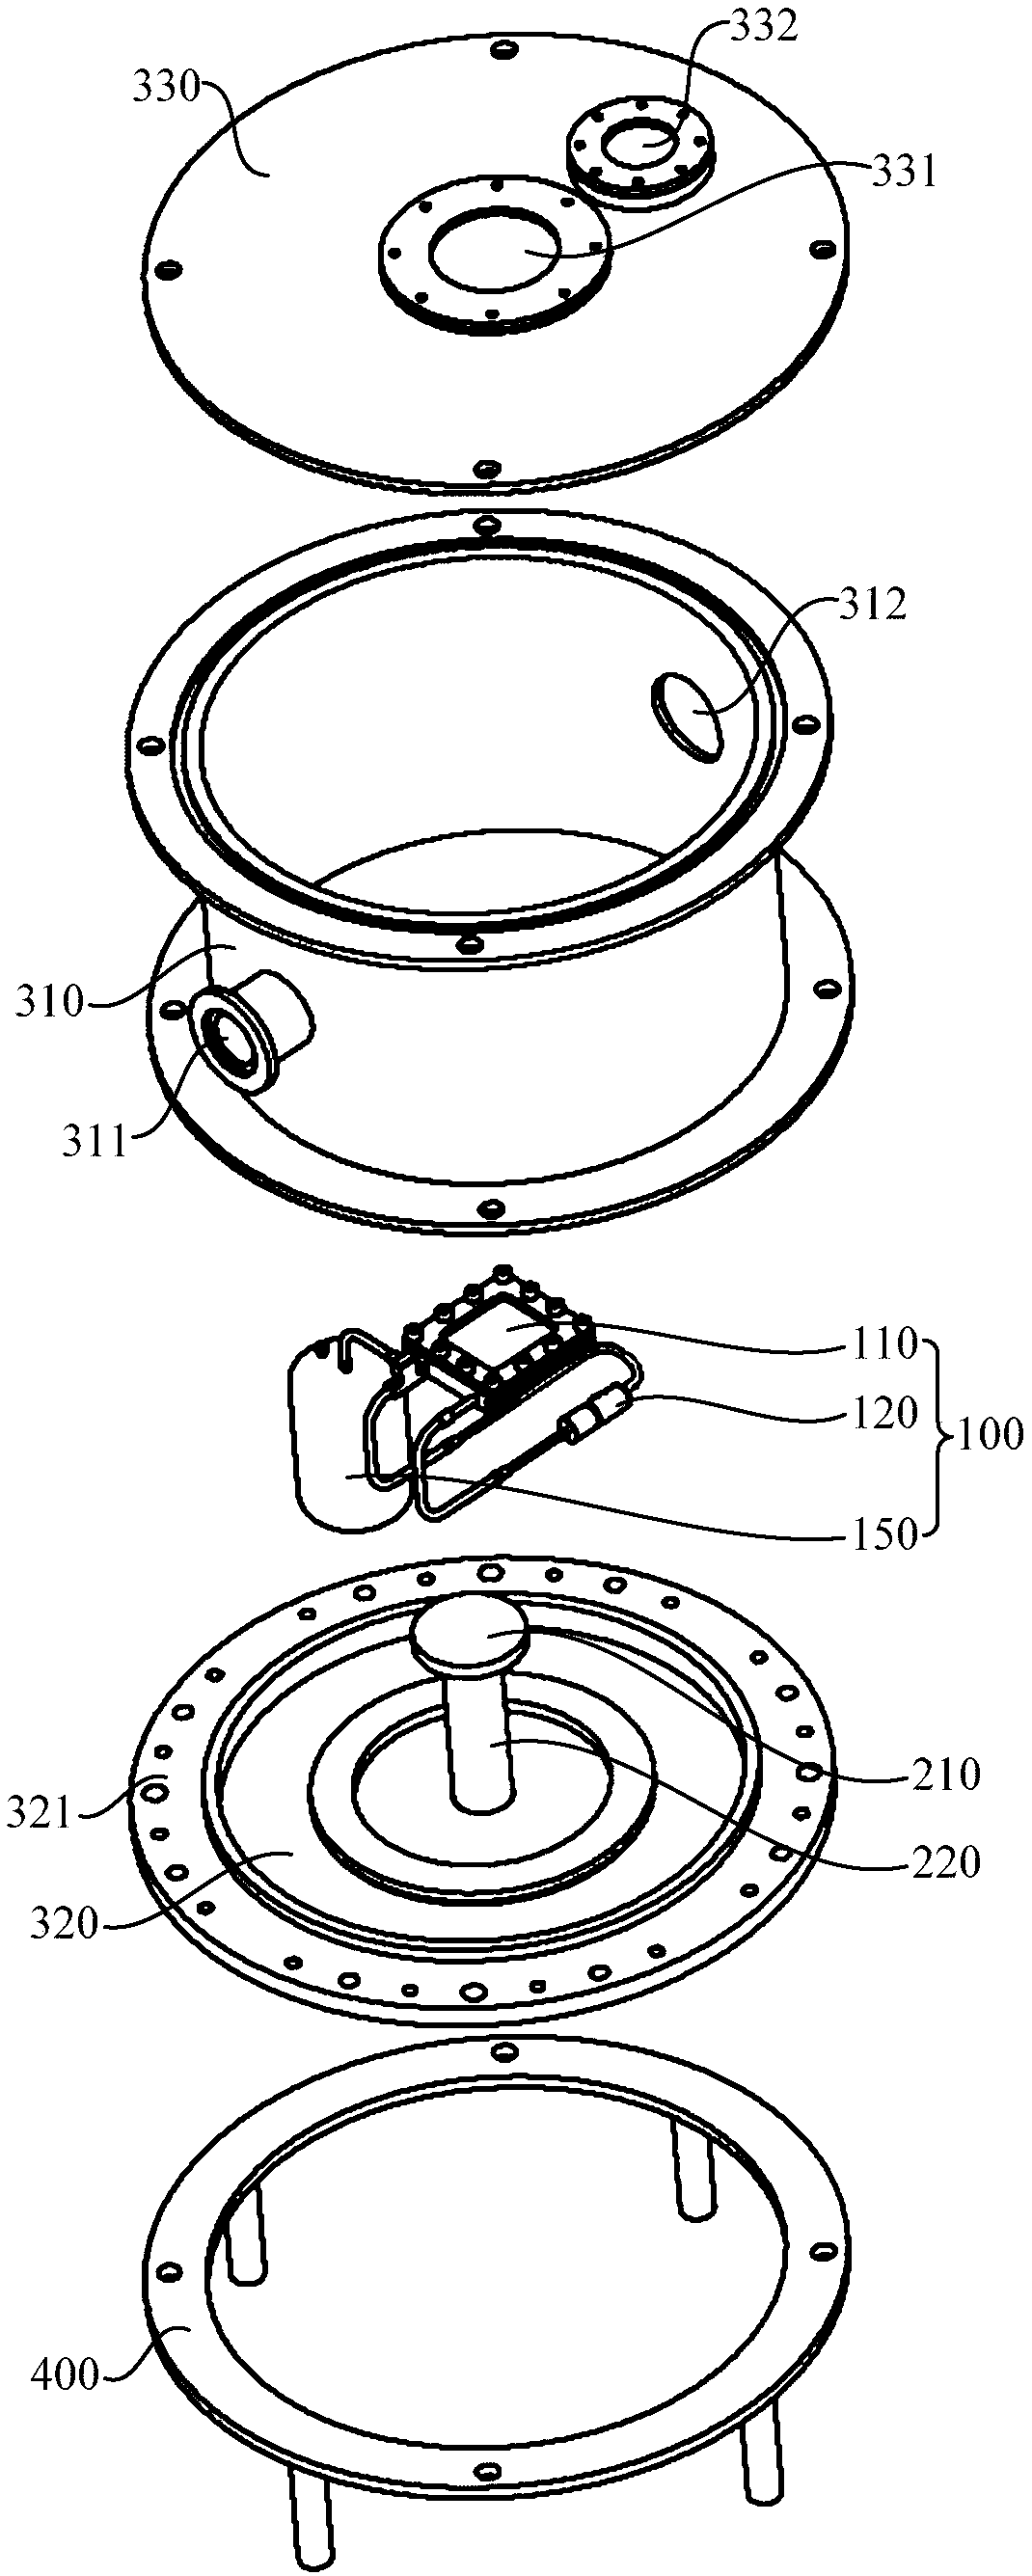 Visual experimental device for low-temperature fluid condensation and flow